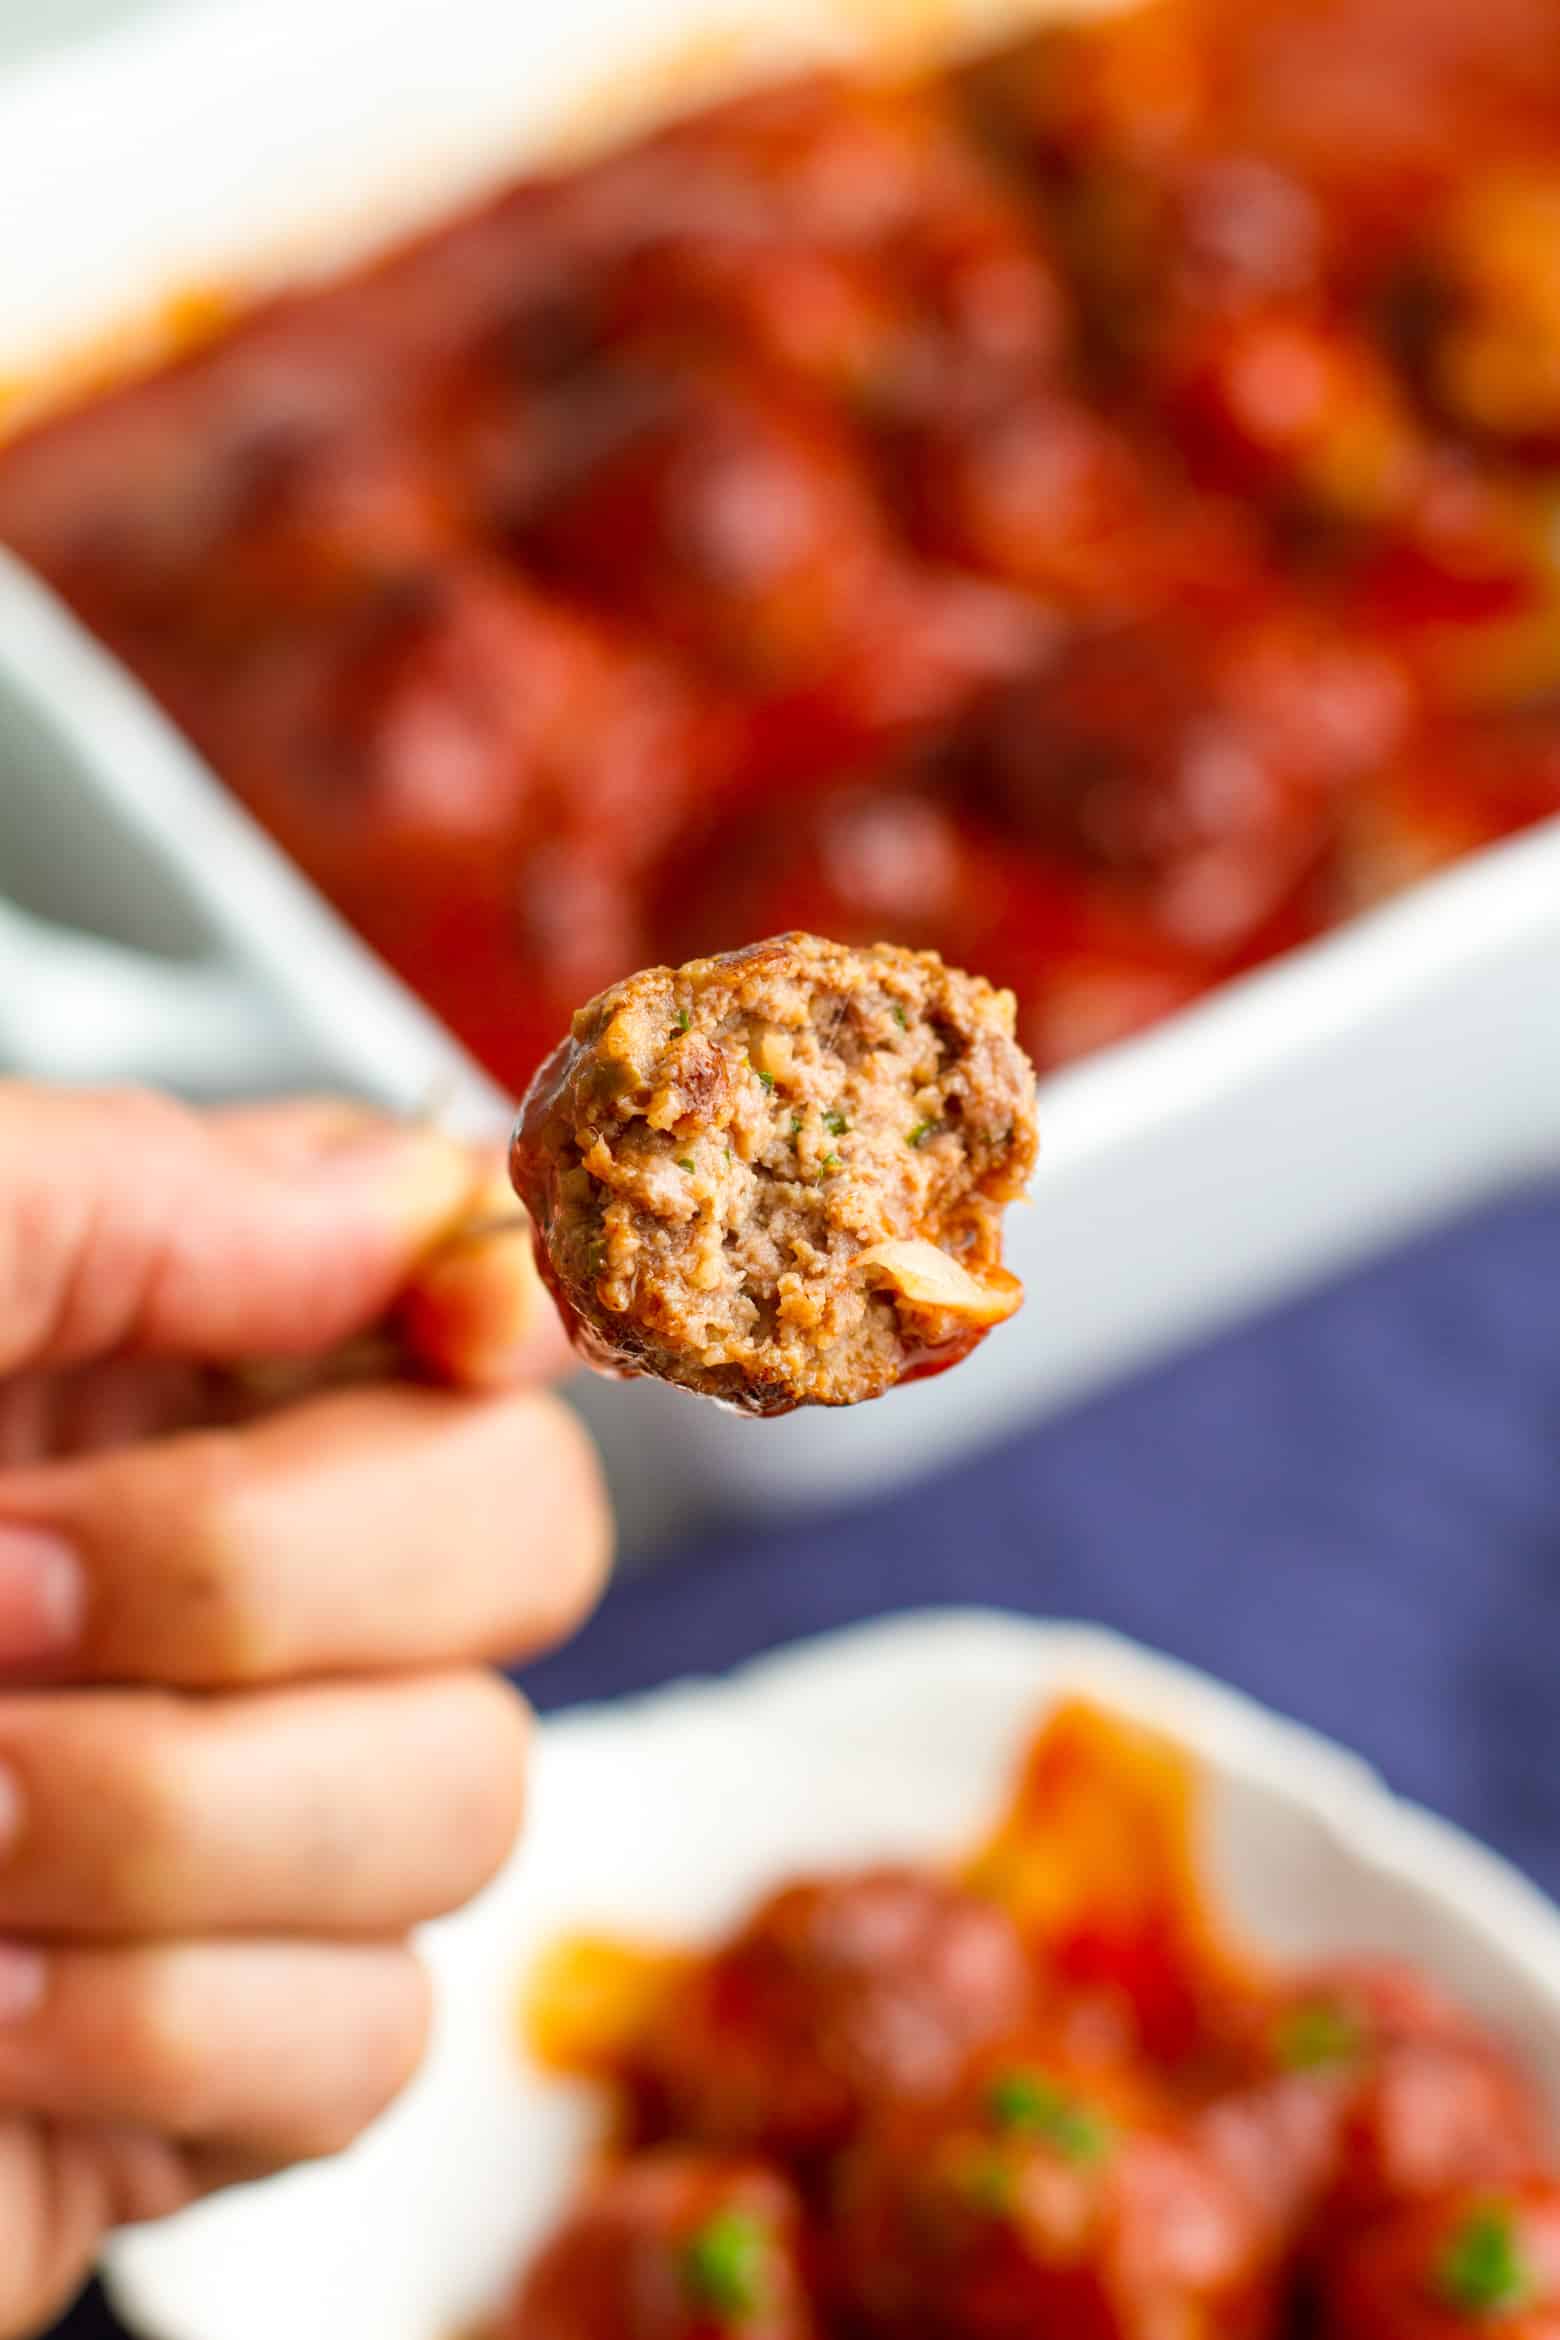 bbq meatball with a bite taken out.